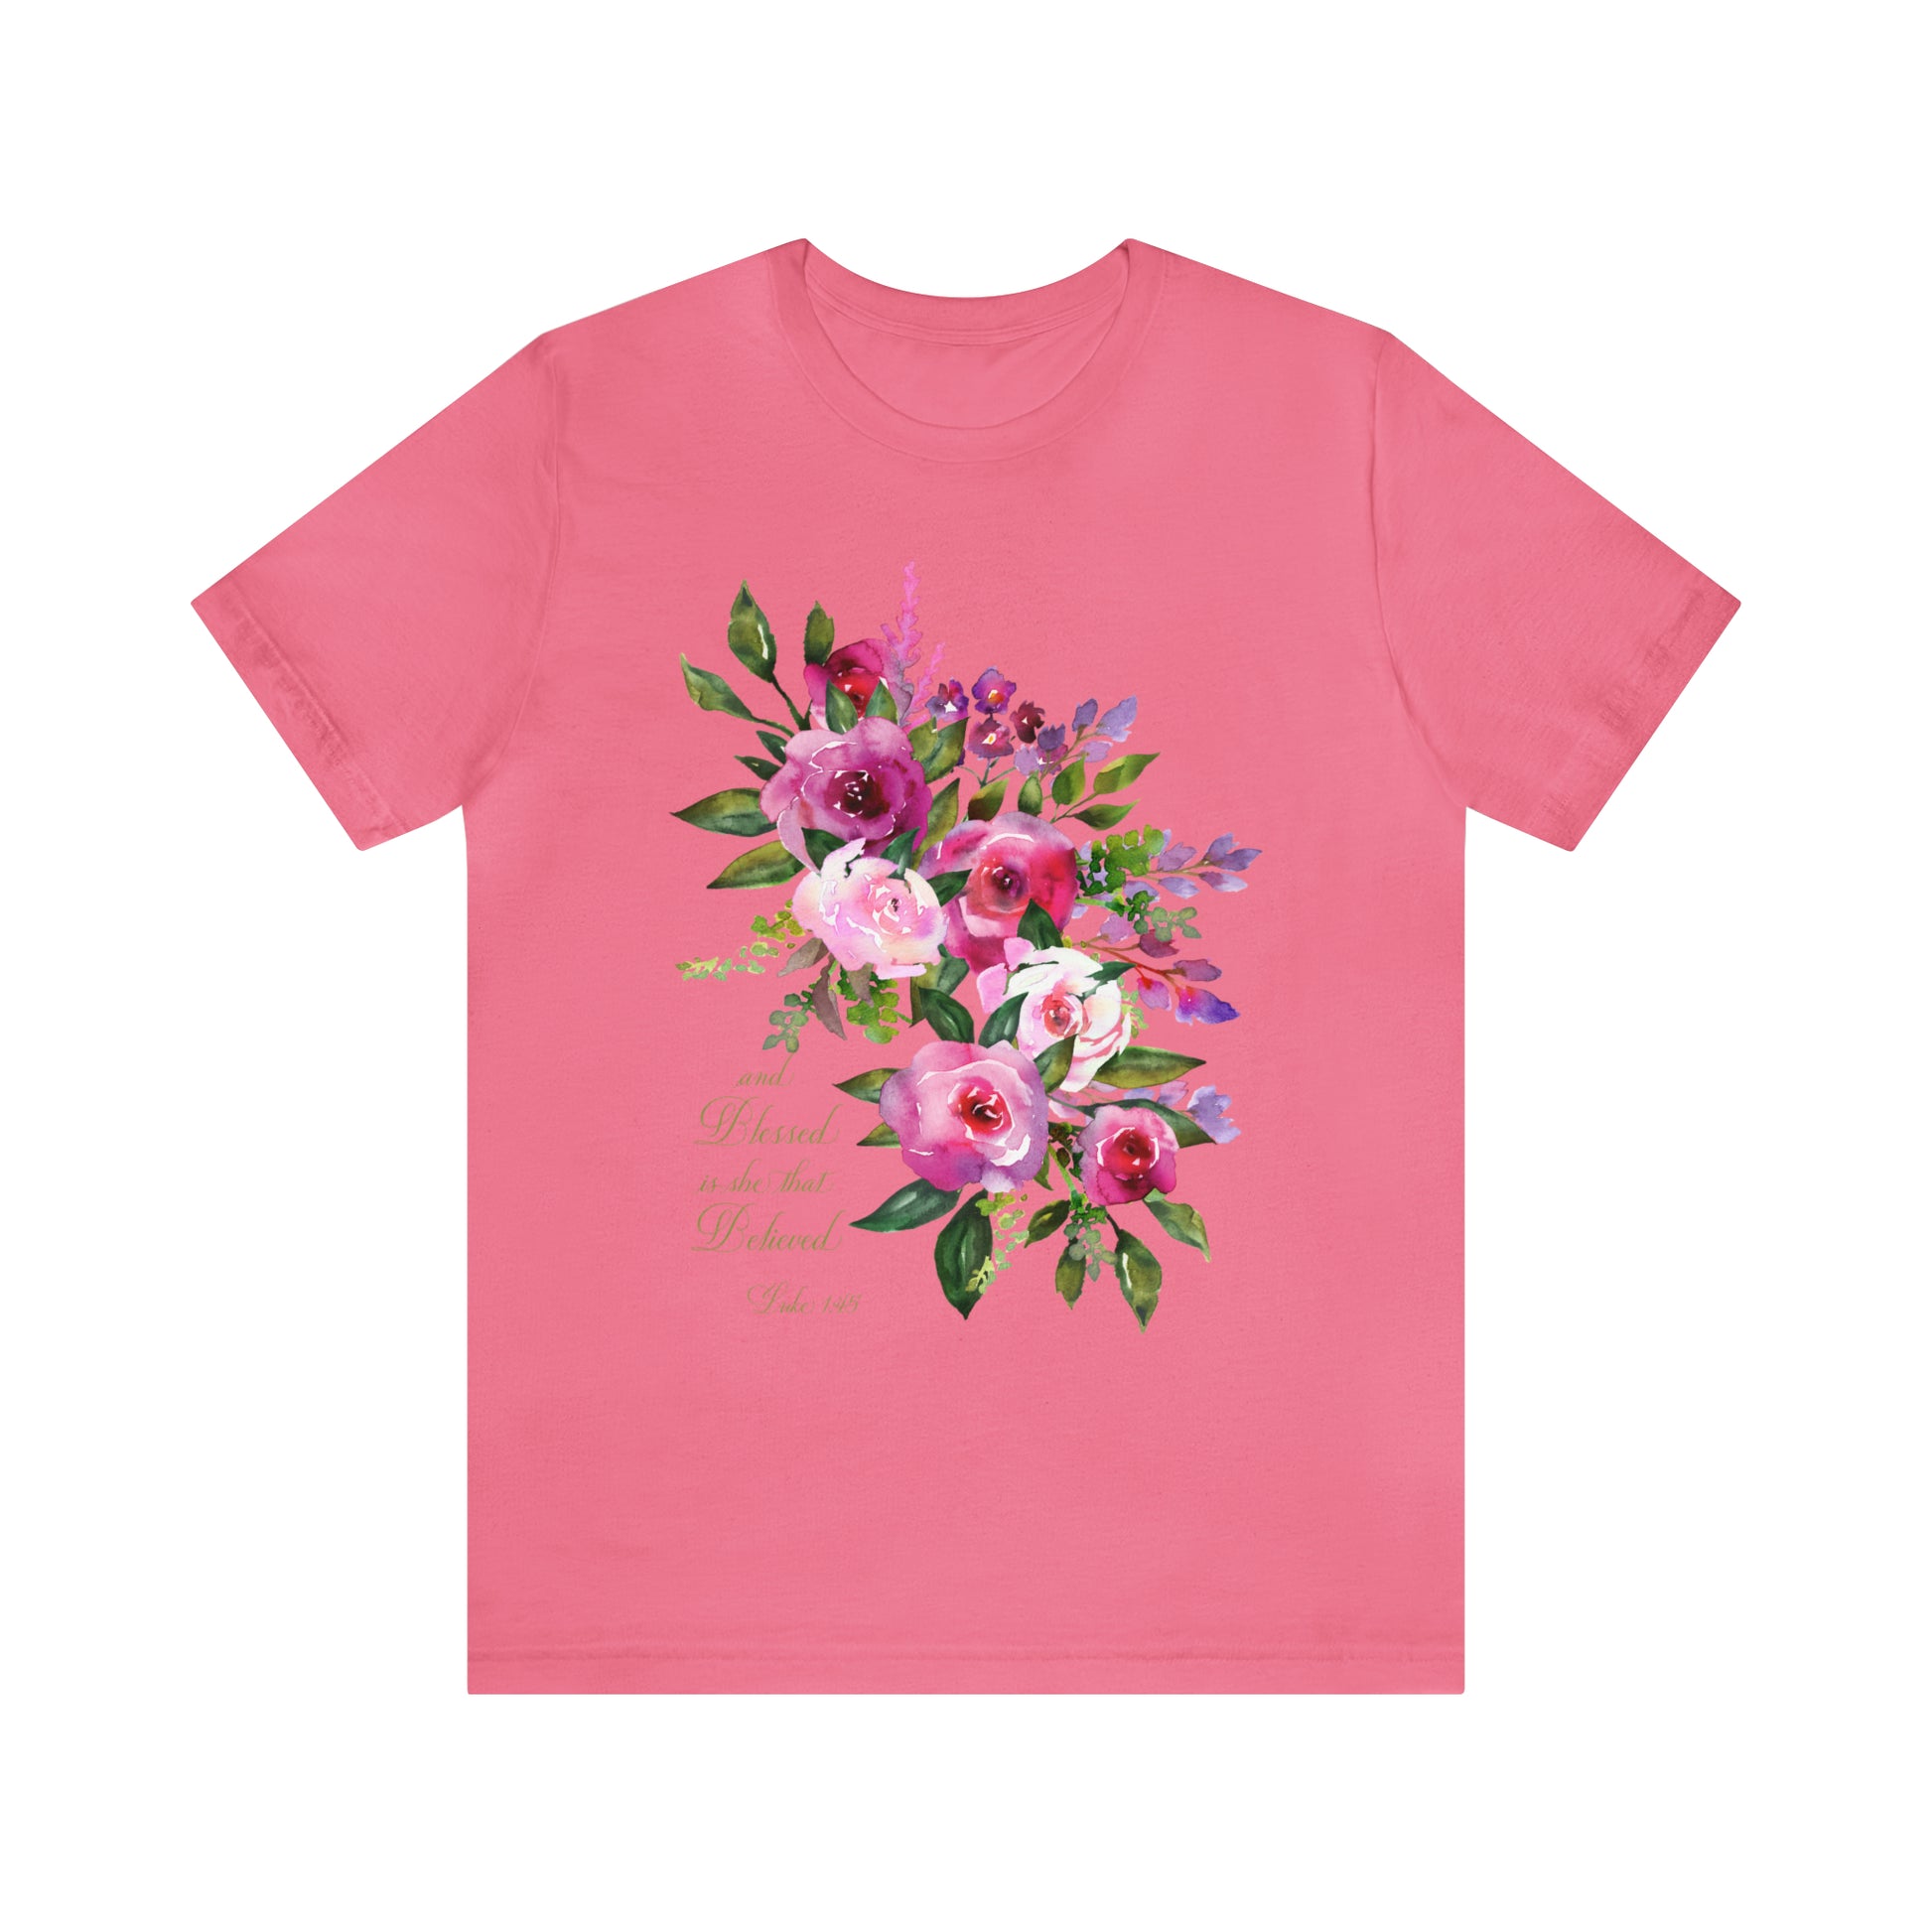 Ladies Floral Watercolor Short Sleeve Tee "Blessed is She"